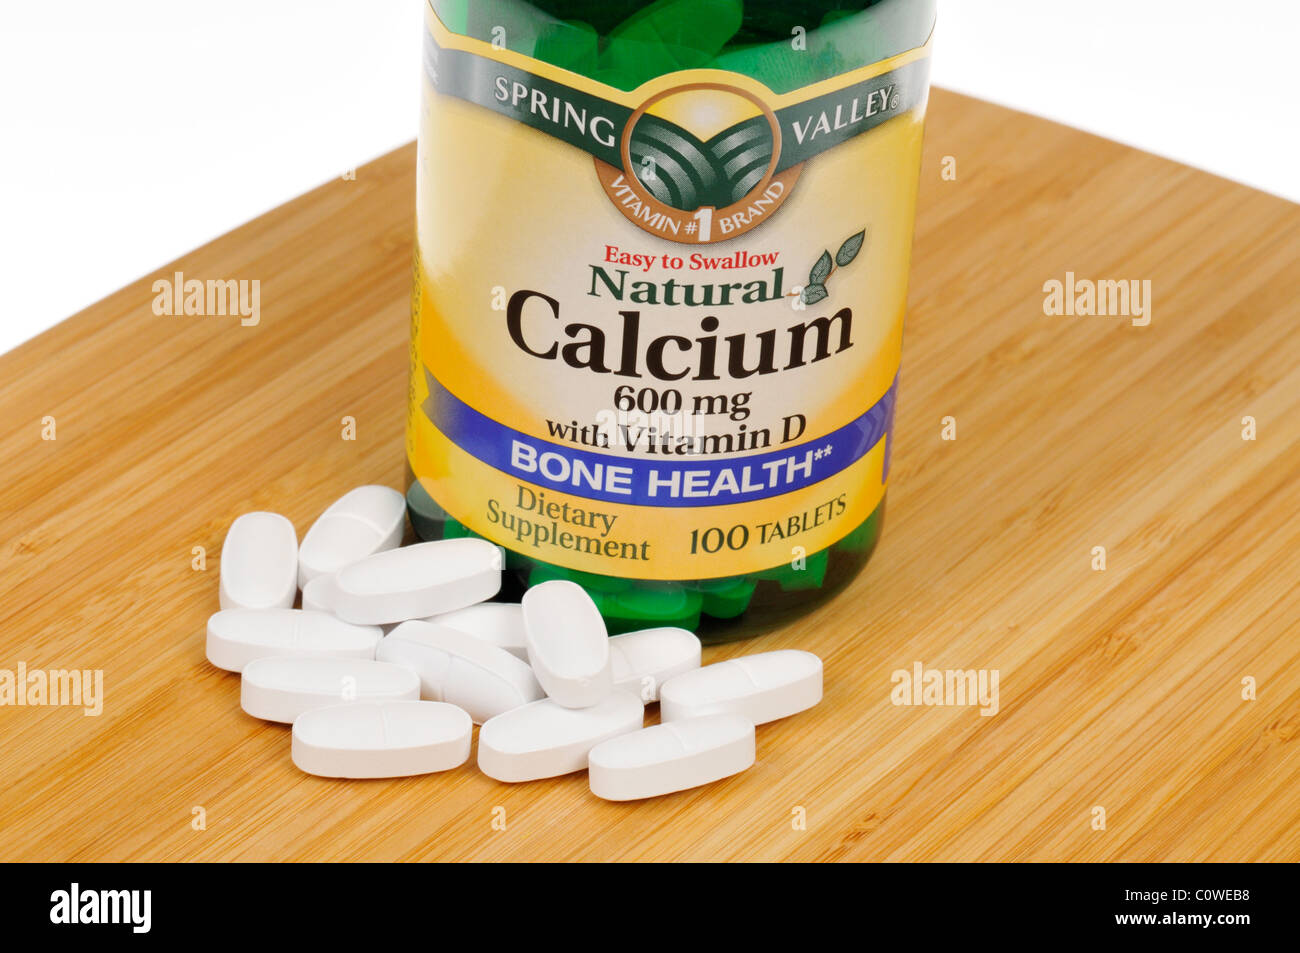 Bottle of Spring Valley Calcium with Vitamin D dietary supplement with tablets scattered. Stock Photo